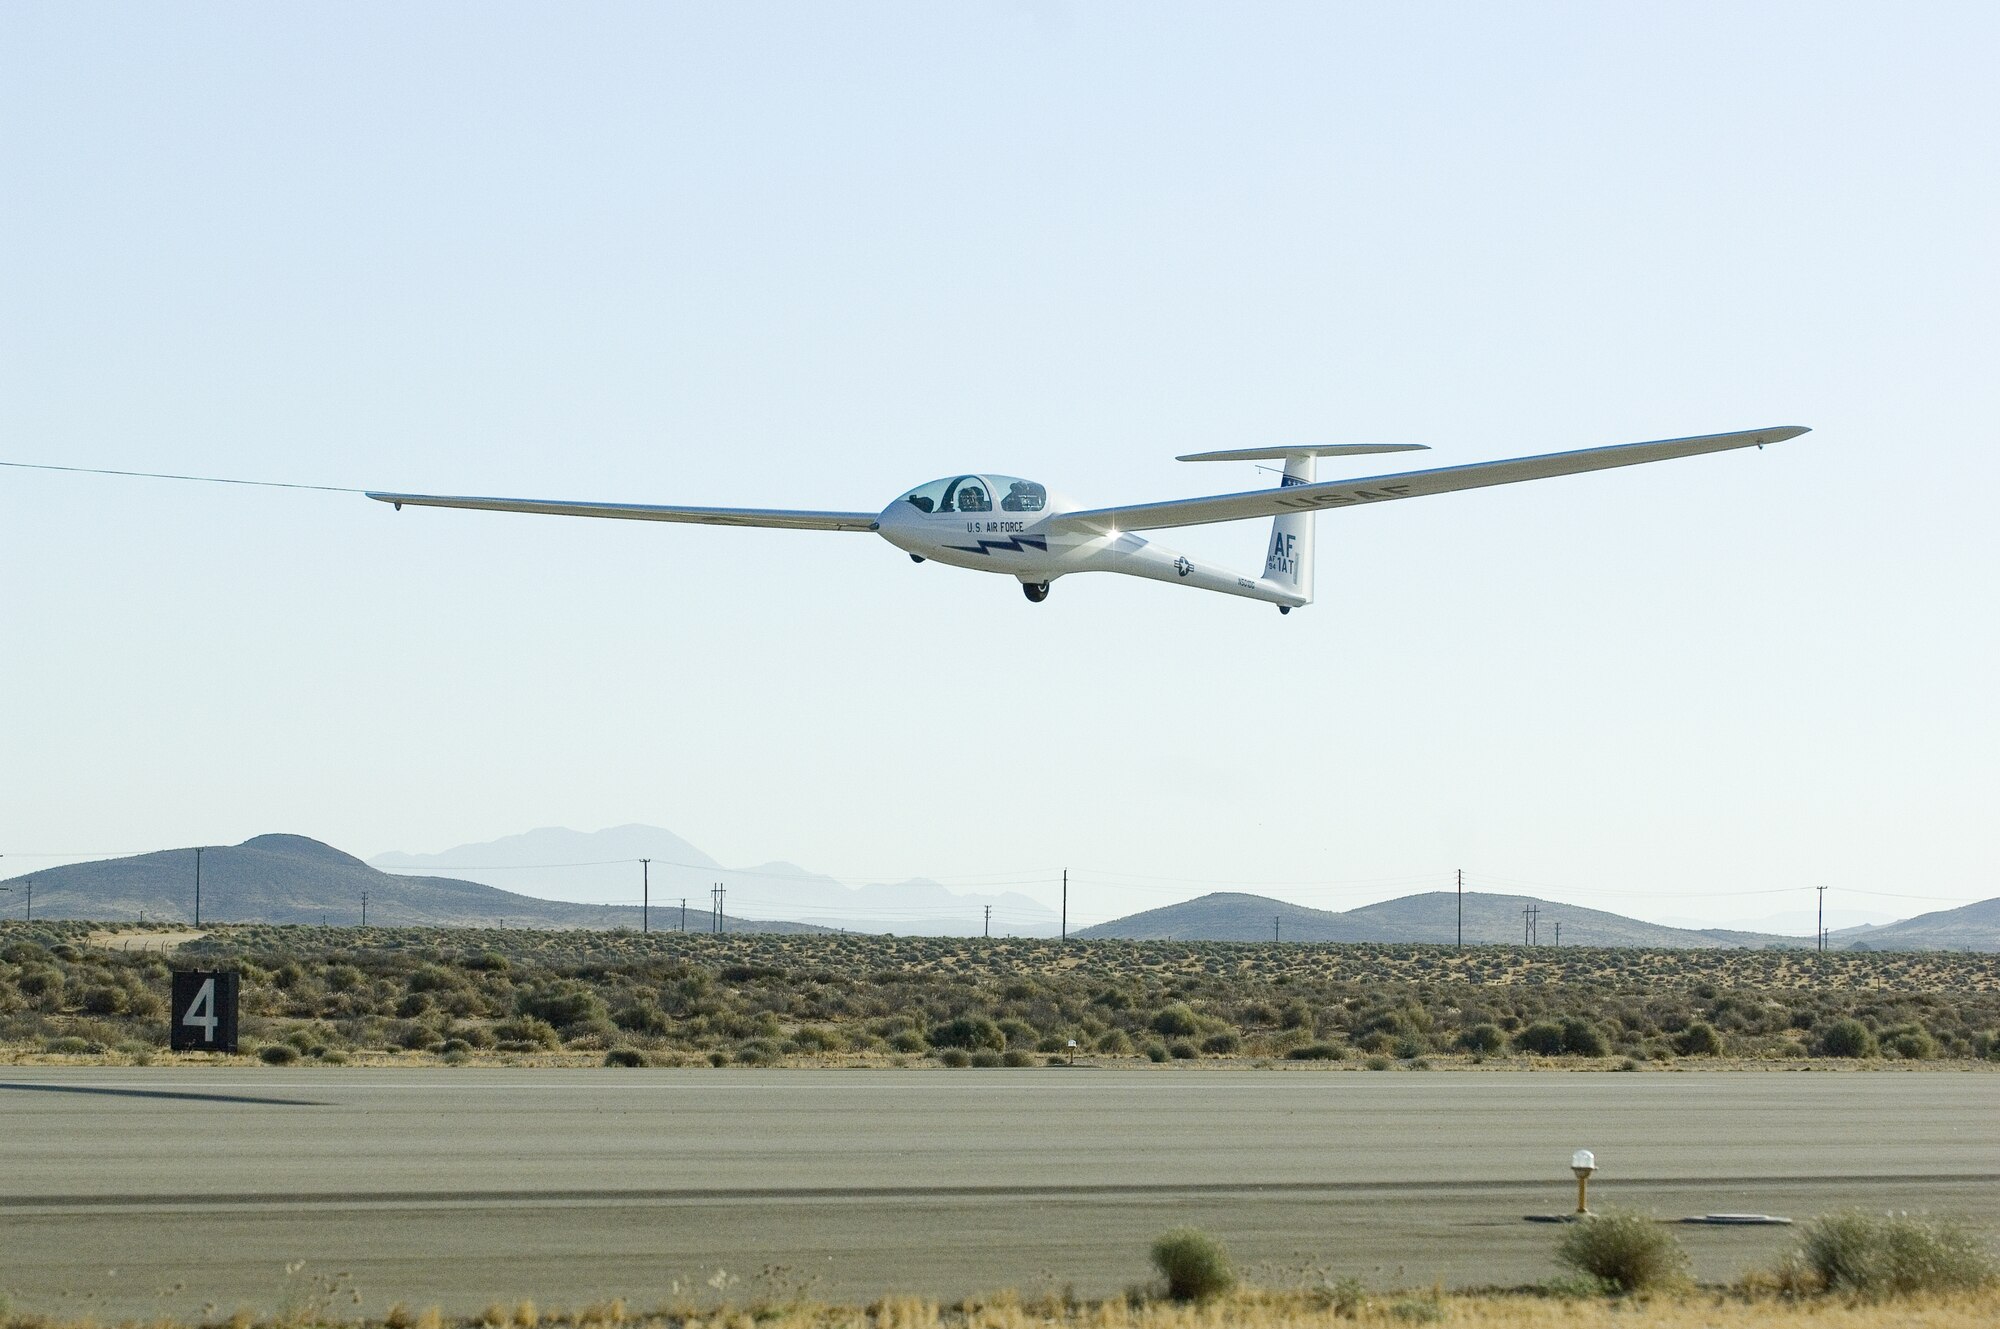 A TG-16A glider takes off from Edwards North Base to conduct a flight test July 6. The Air Force Academy purchased 19 new gliders this month to replace aging gliders. The 445th Flight Test Squadron tested one of the gliders to ensure it meets the needs of the academy. (Air Force photo by Rob Densmore)